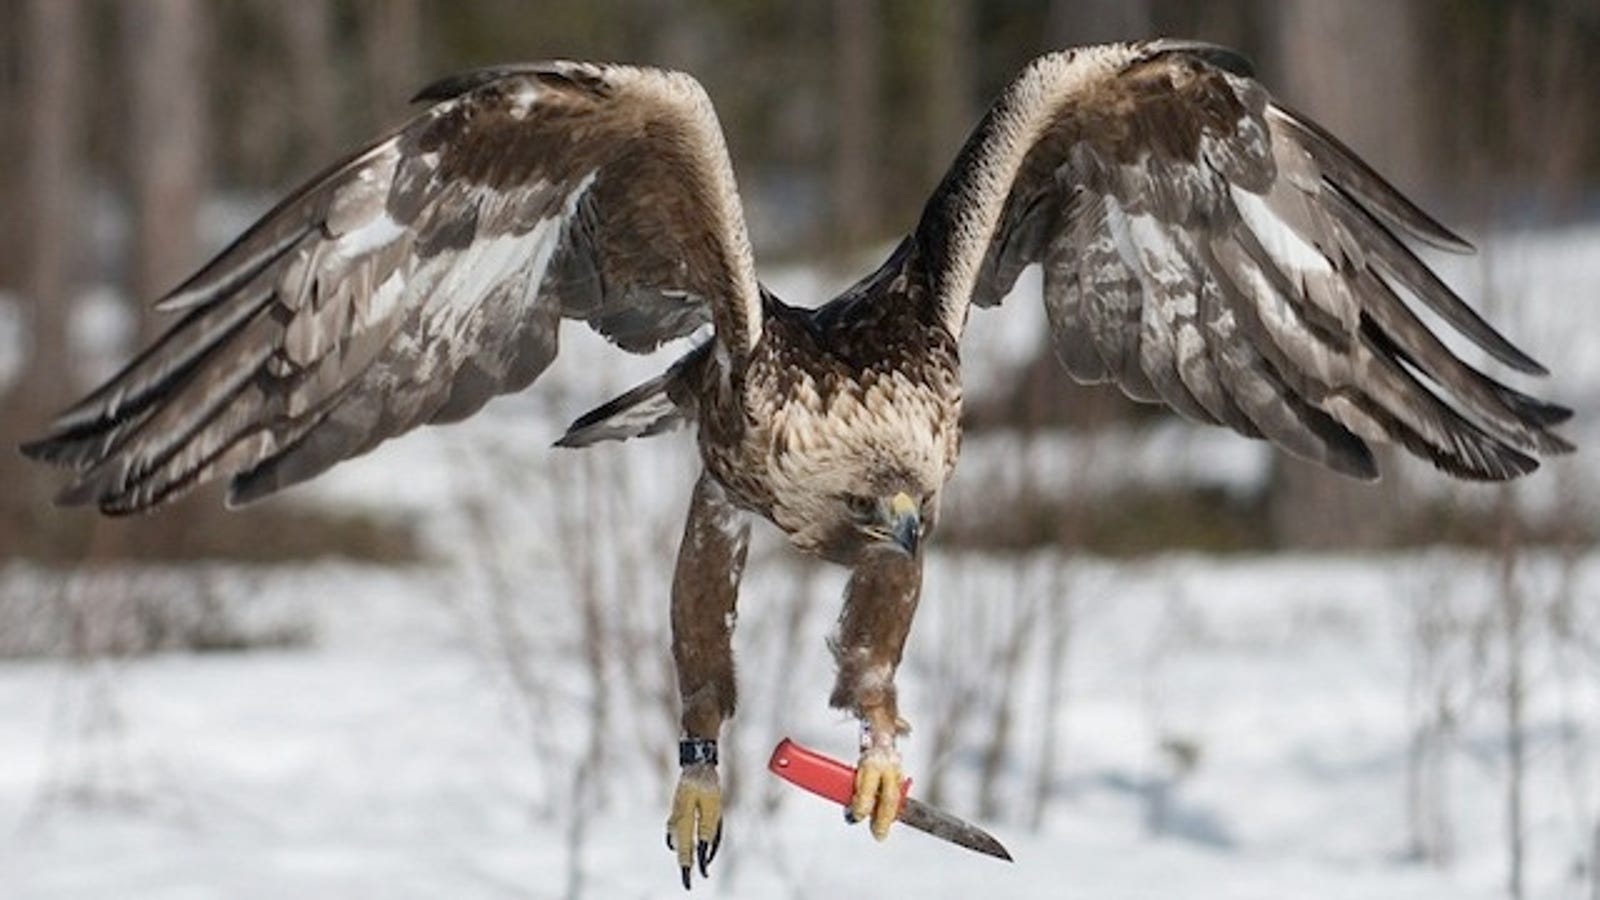 Yes that really is an eagle wielding a knife